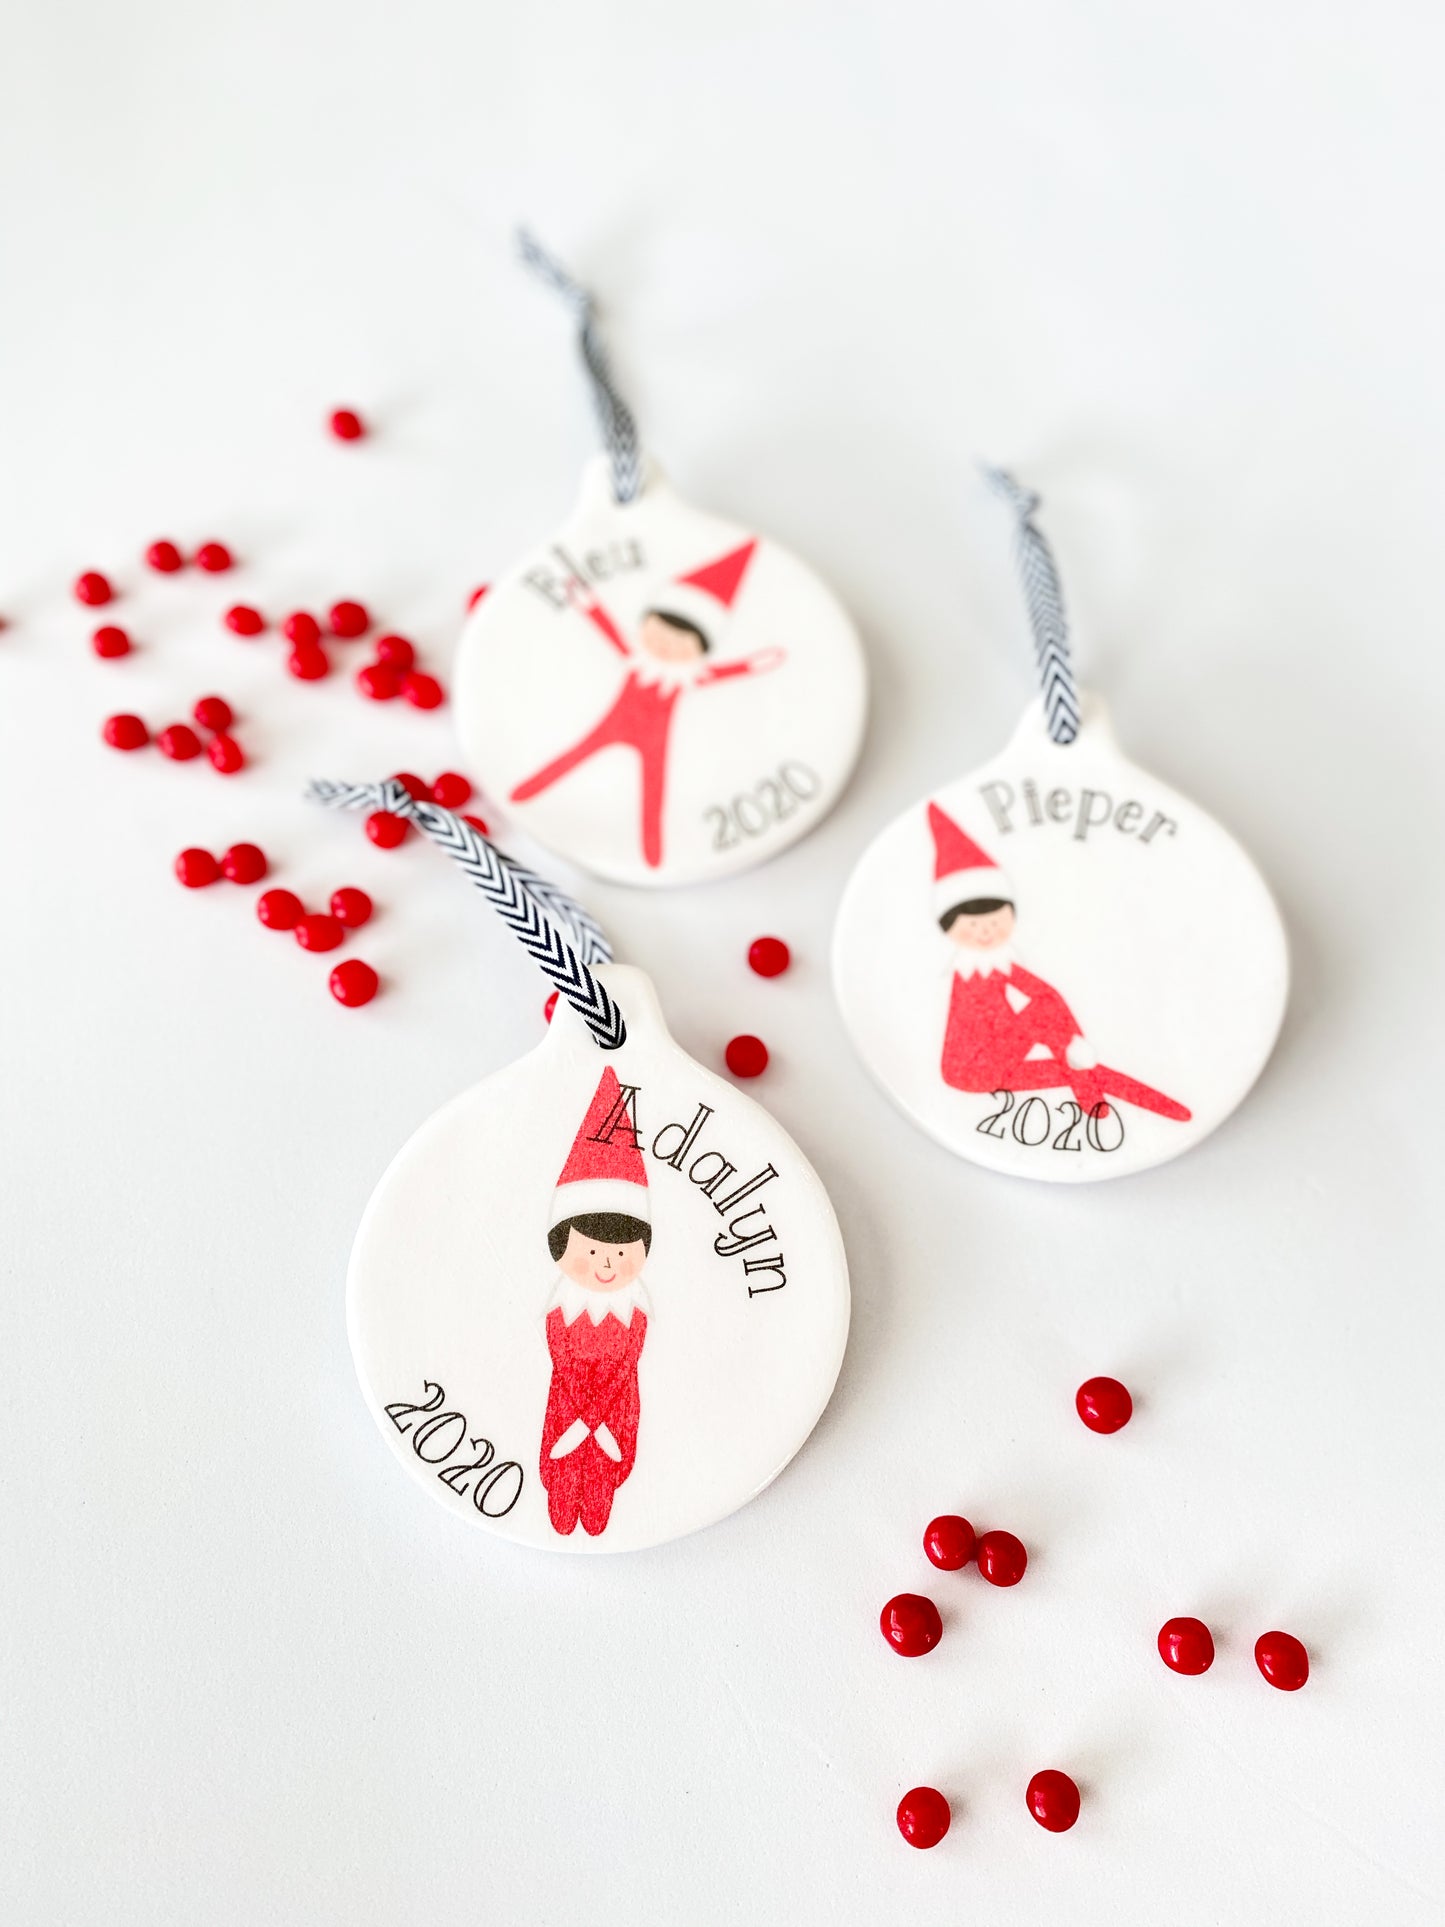 ELF ON THE PERSONALIZED ORNAMENT